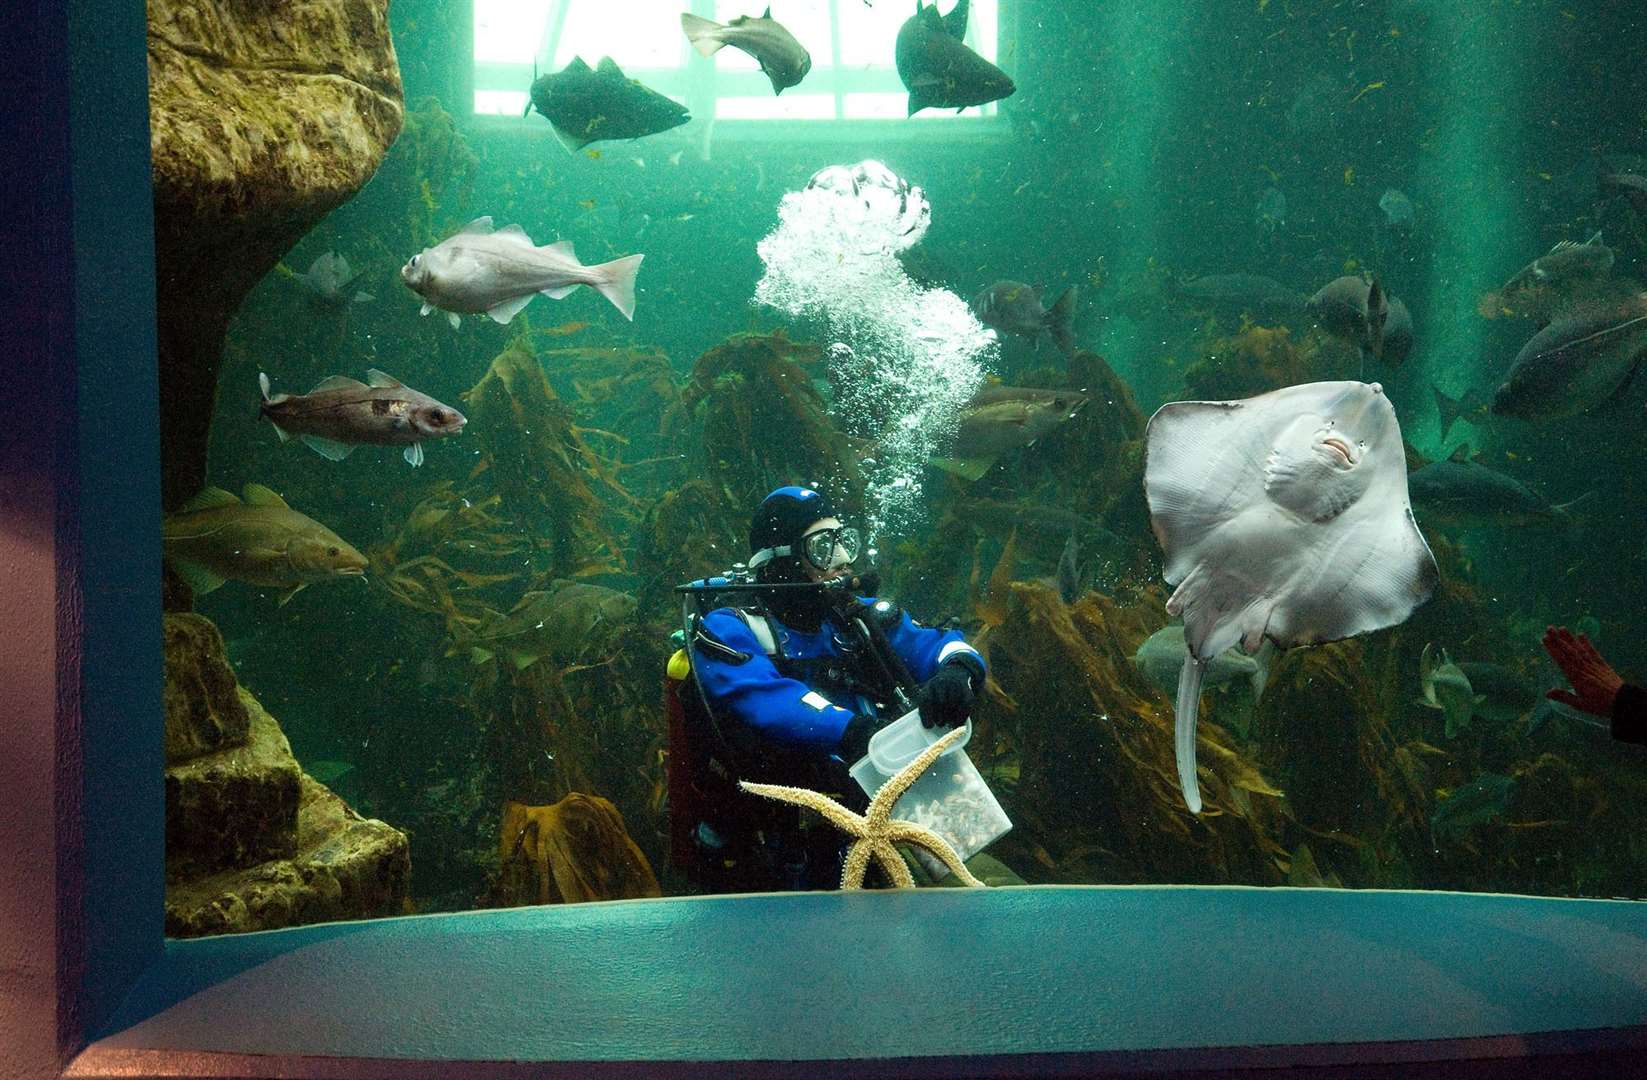 Macduff Marine Aquarium is one of several north-east recipients of funding from the Coastal Communities Challenge Fund.